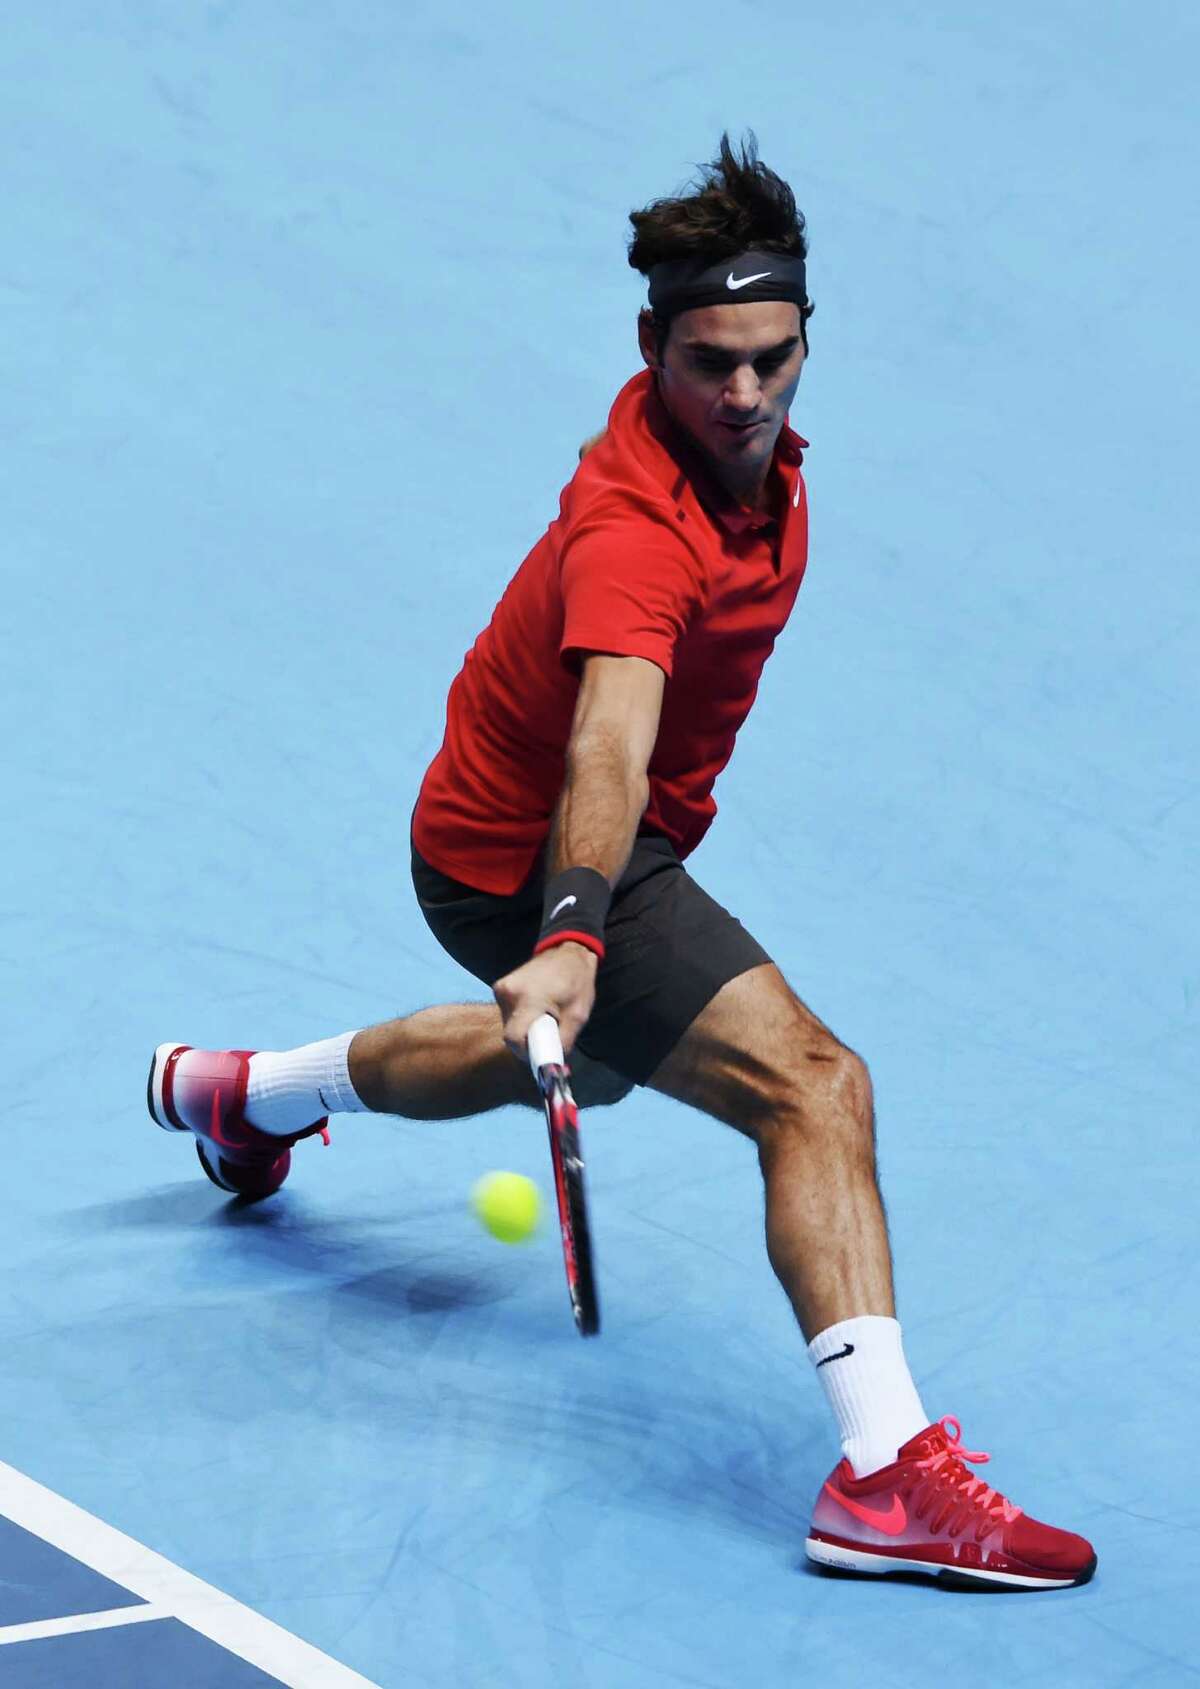 Roger Federer chases down a shot during his victory over Kei Nishikori on Tuesday.